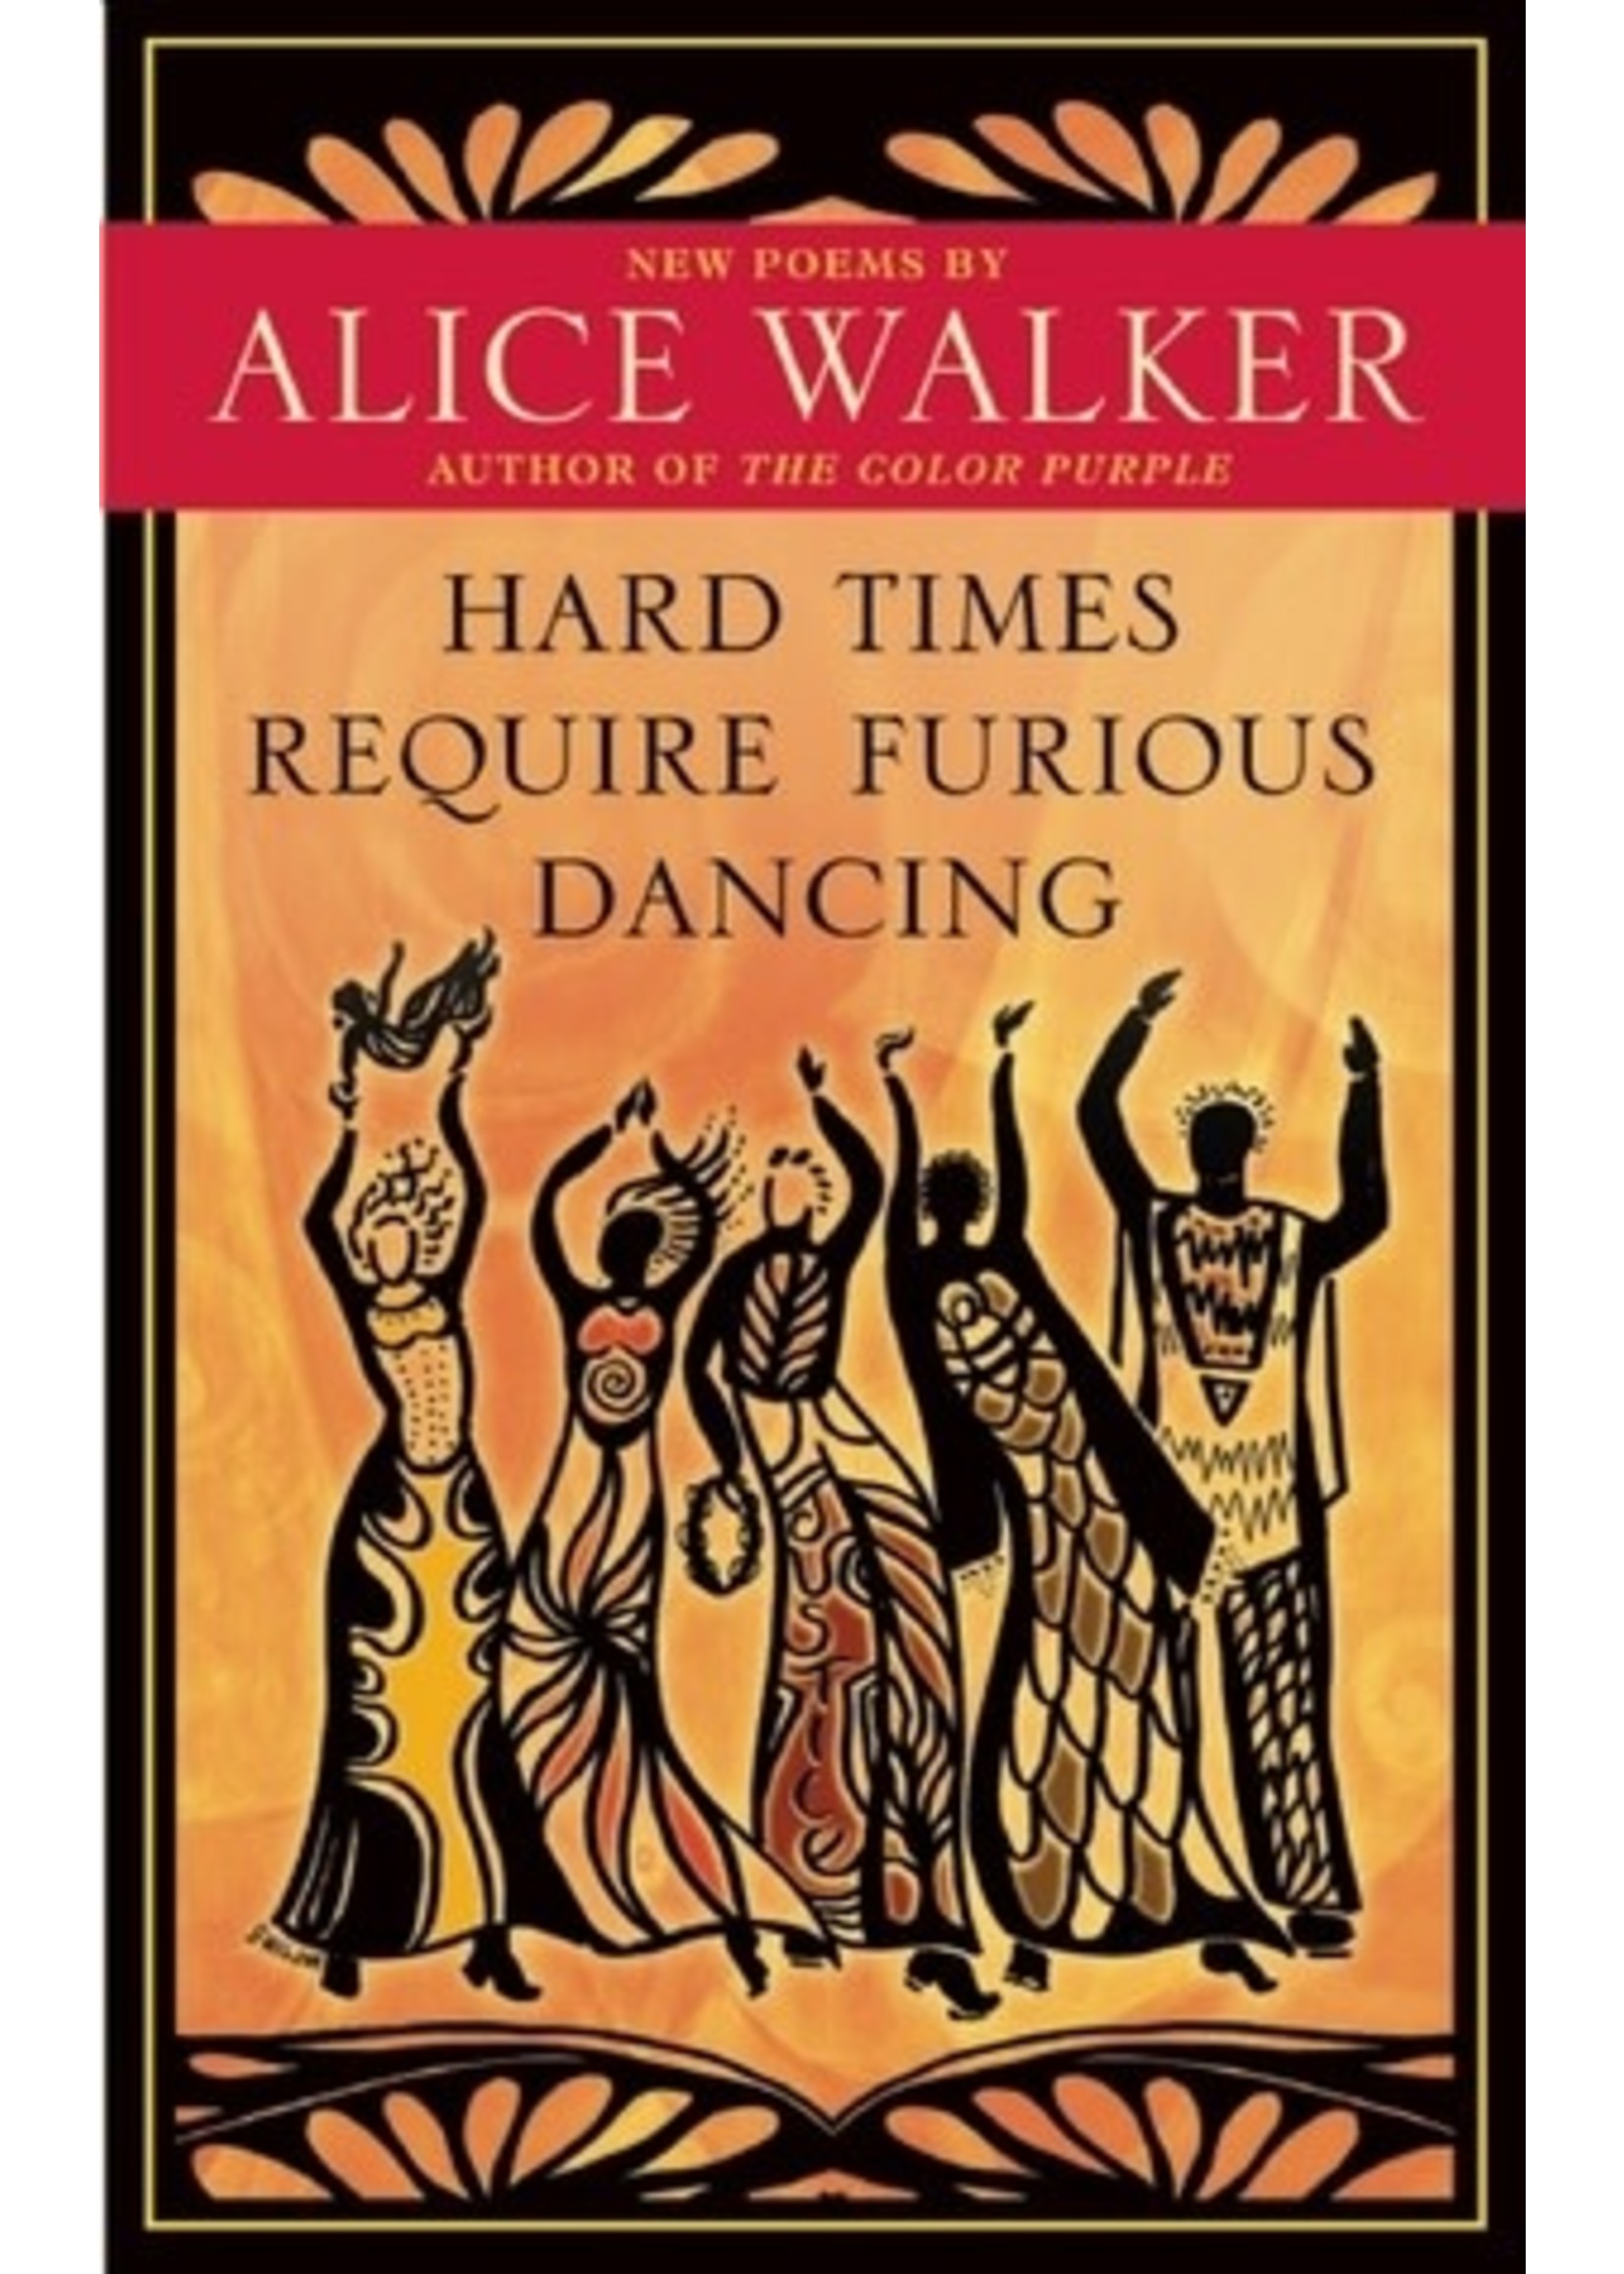 Hard Times Require Furious Dancing : New Poems by Alice Walker